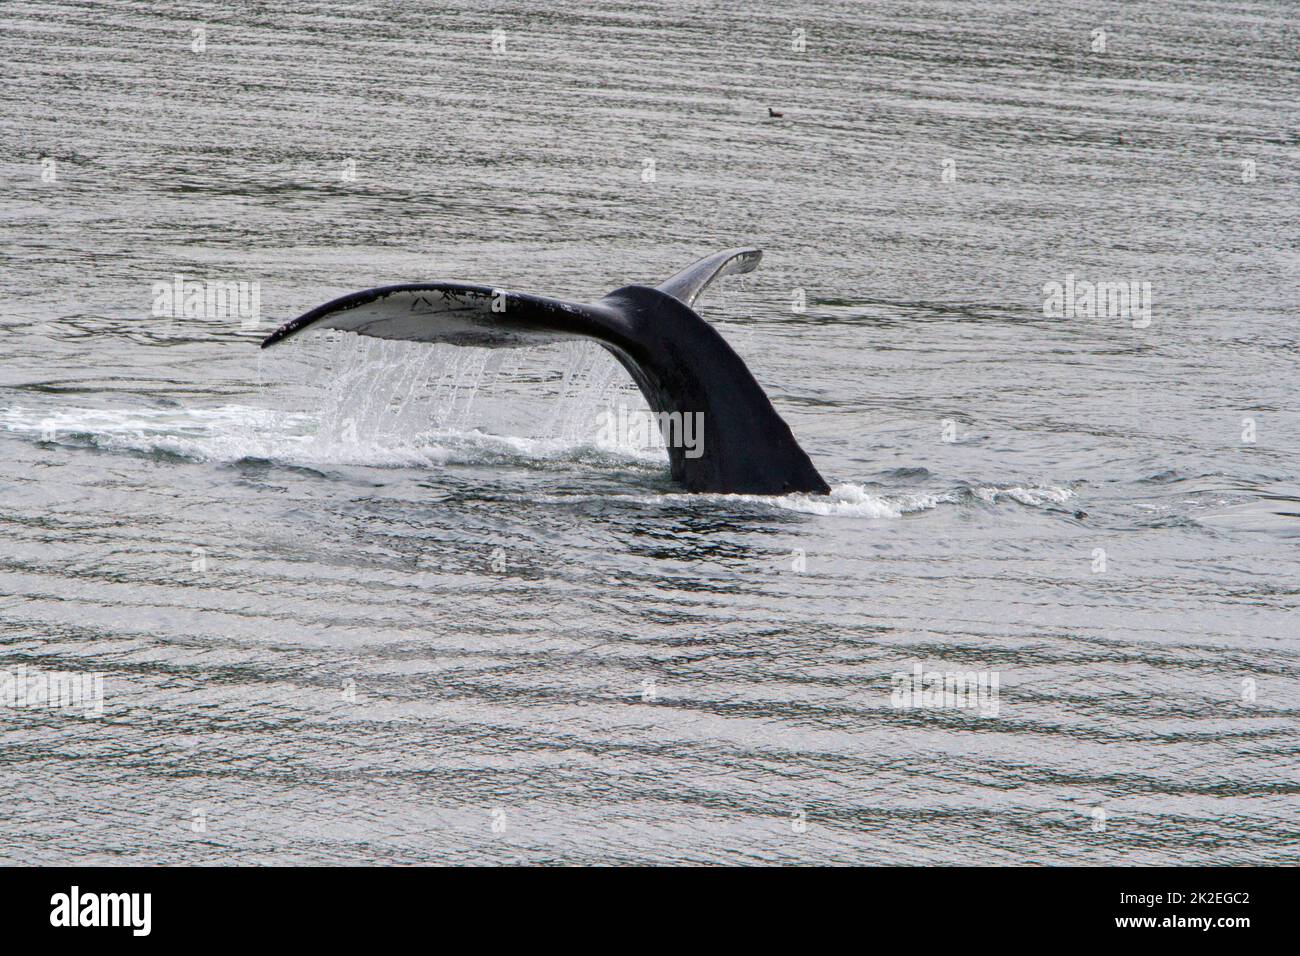 The tail fluke of a Humpback Whale (Megaptera novaeangliae) diving in the Khutzeymateen Inlet north of Prince Rupert, BC, Canada in July Stock Photo